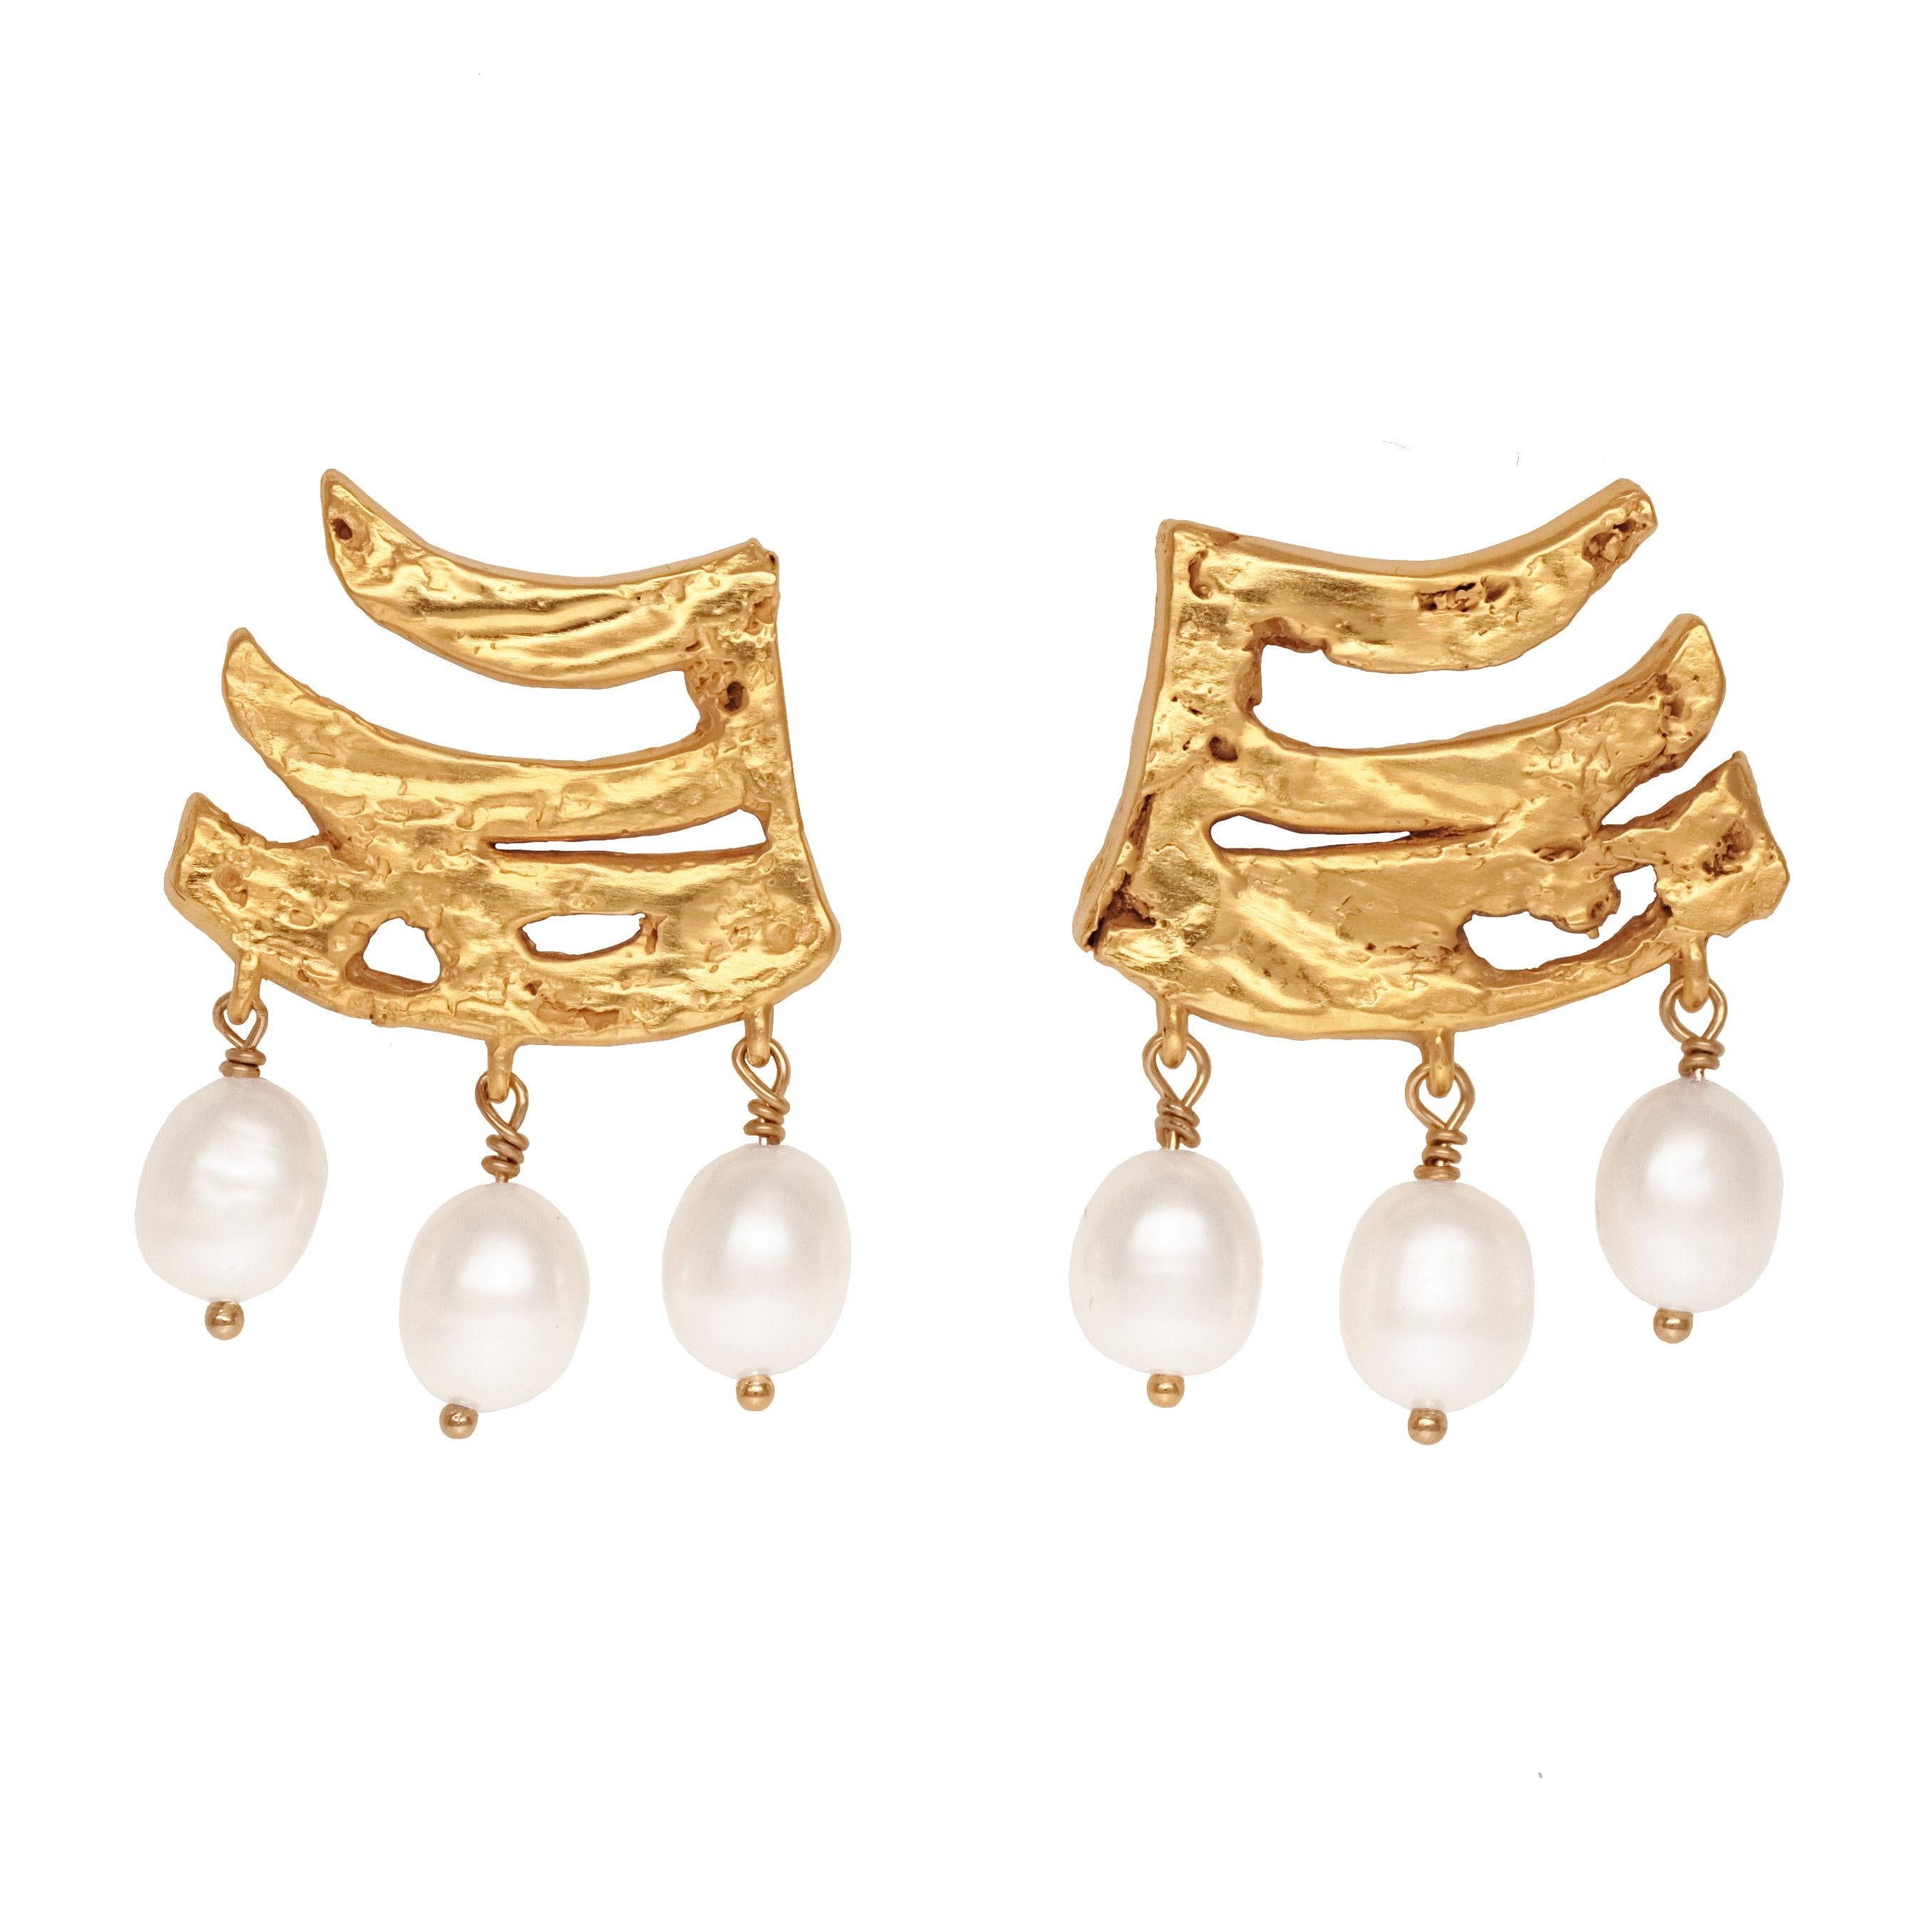 Eternal Luck Earrings in Gold with Freshwater Pearls In New Condition For Sale In Brooklyn, NY